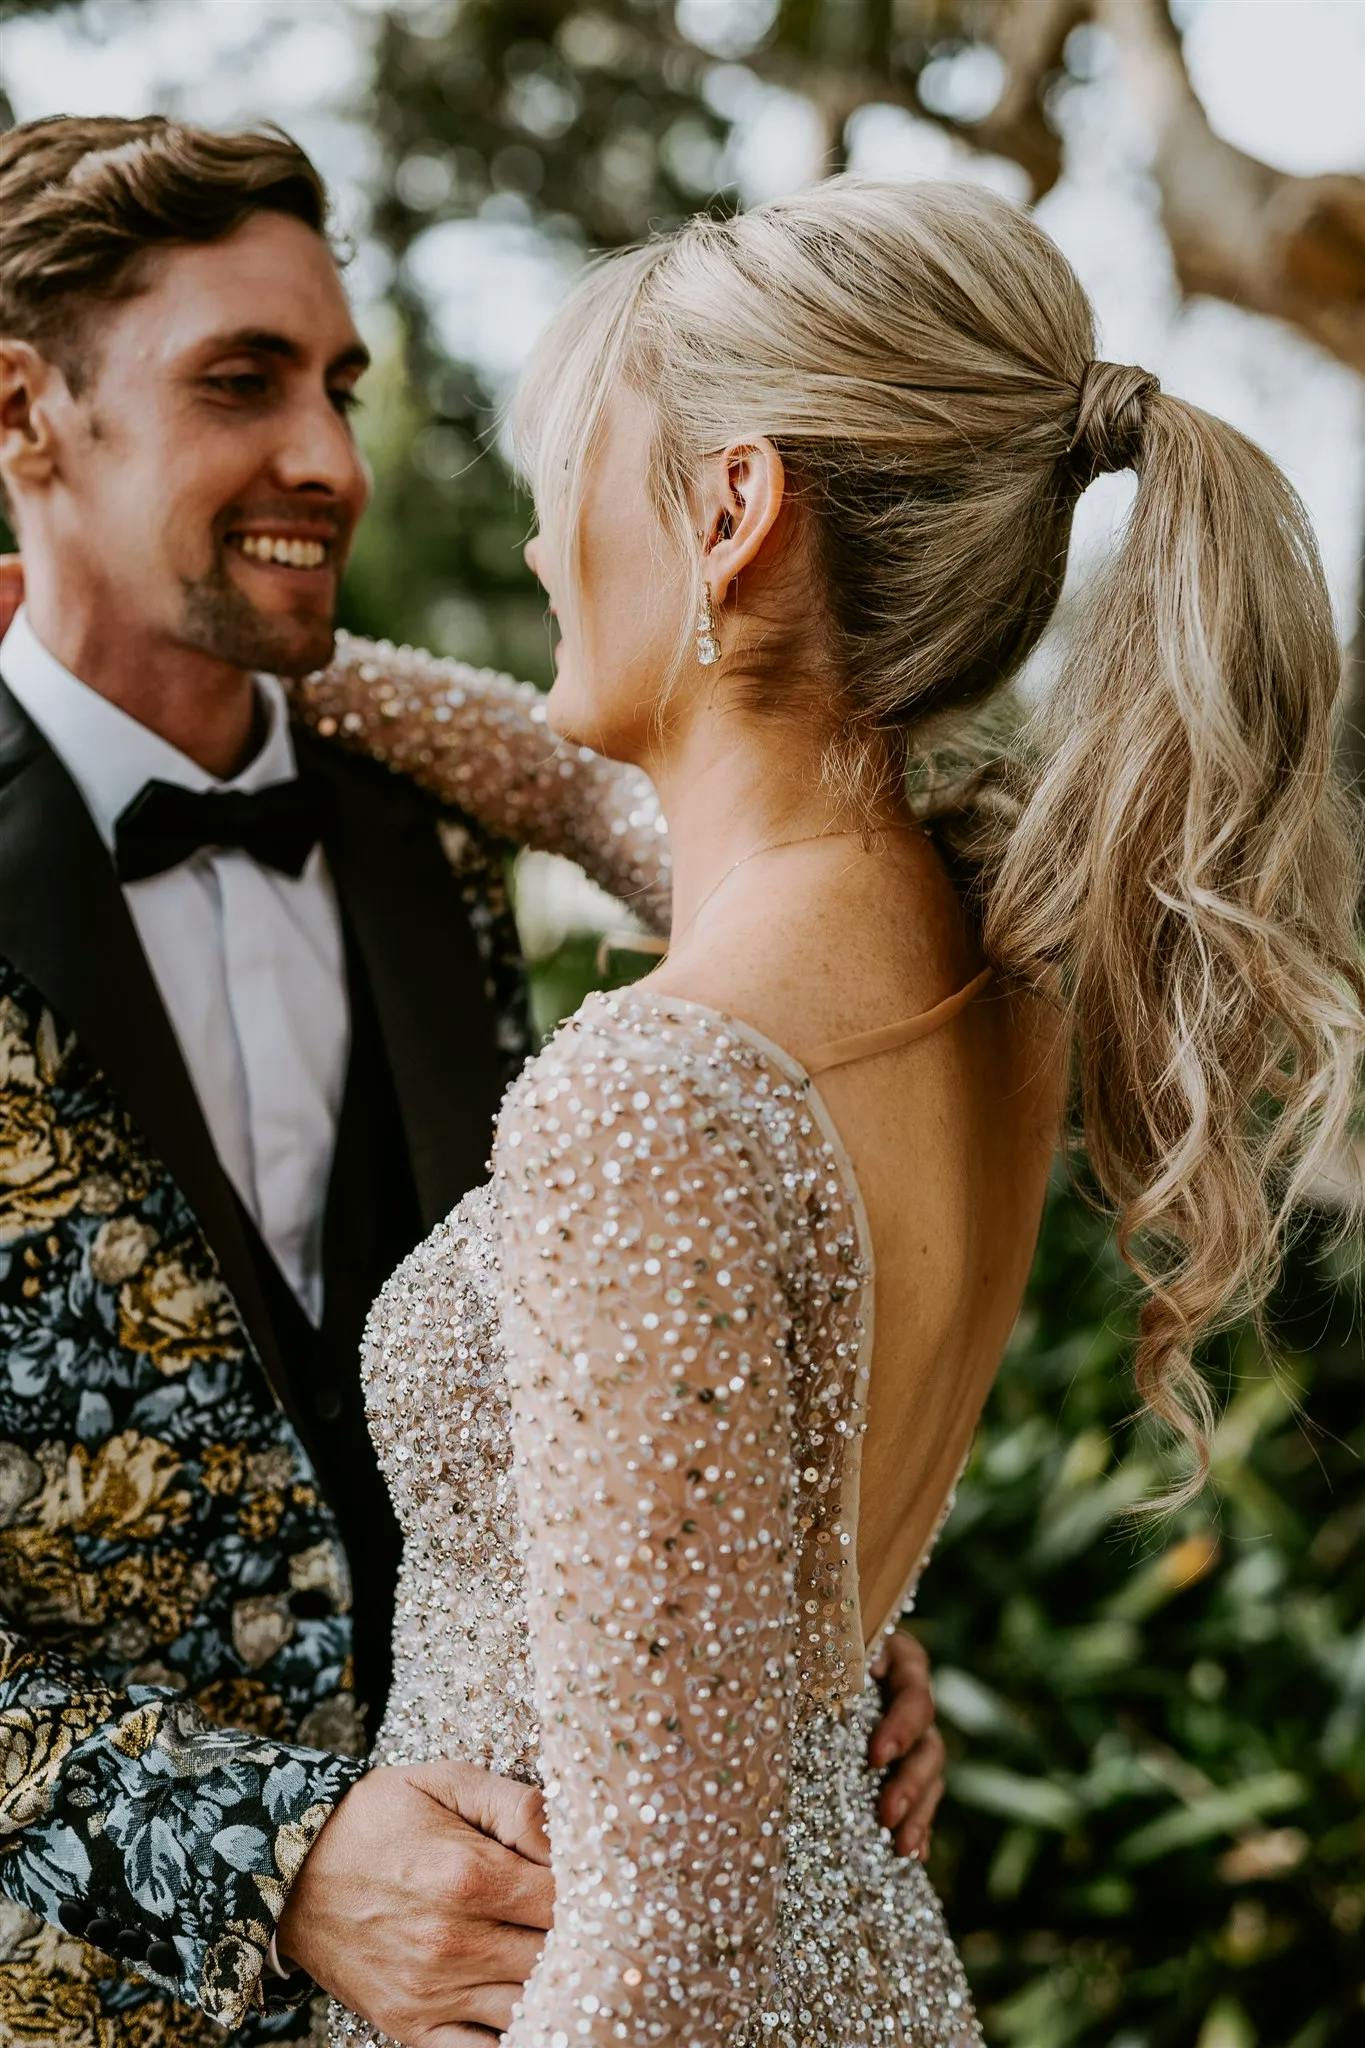 A couple stands close together outdoors, smiling at each other. The woman has long, blonde hair in a ponytail and wears a sparkling, long-sleeved gown. The man has short, brown hair and wears a floral patterned suit jacket with a black lapel and a bow tie.